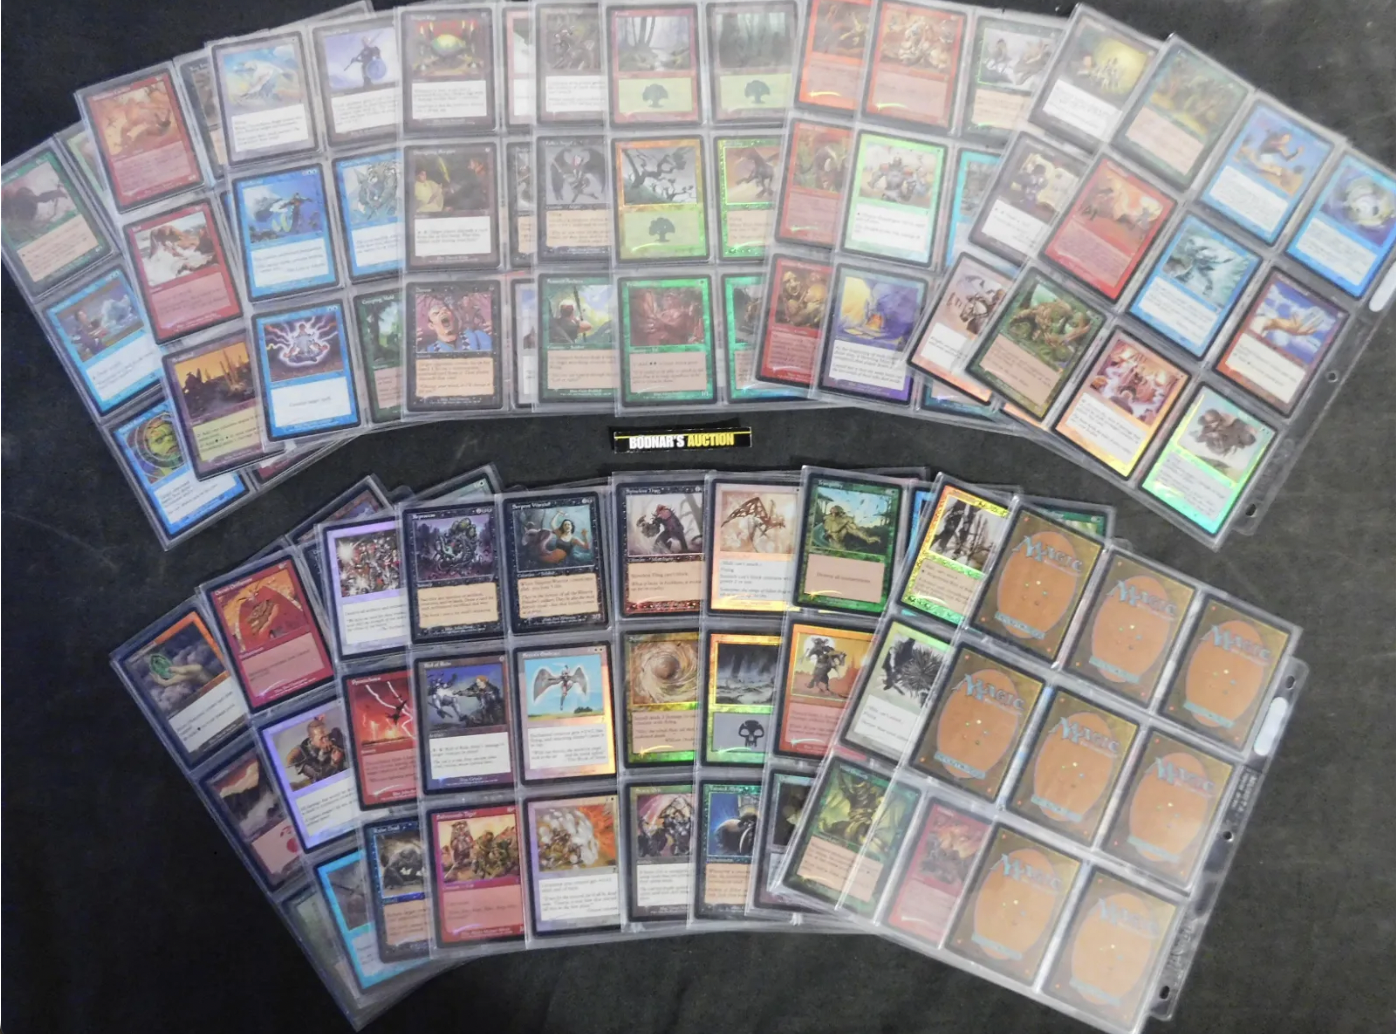 A complete seventh edition foil set from 2001, having all 350 cards, brought $9,000 plus the buyer’s premium in February 2021. Image courtesy of Bodnar’s Auction Sales and LiveAuctioneers.